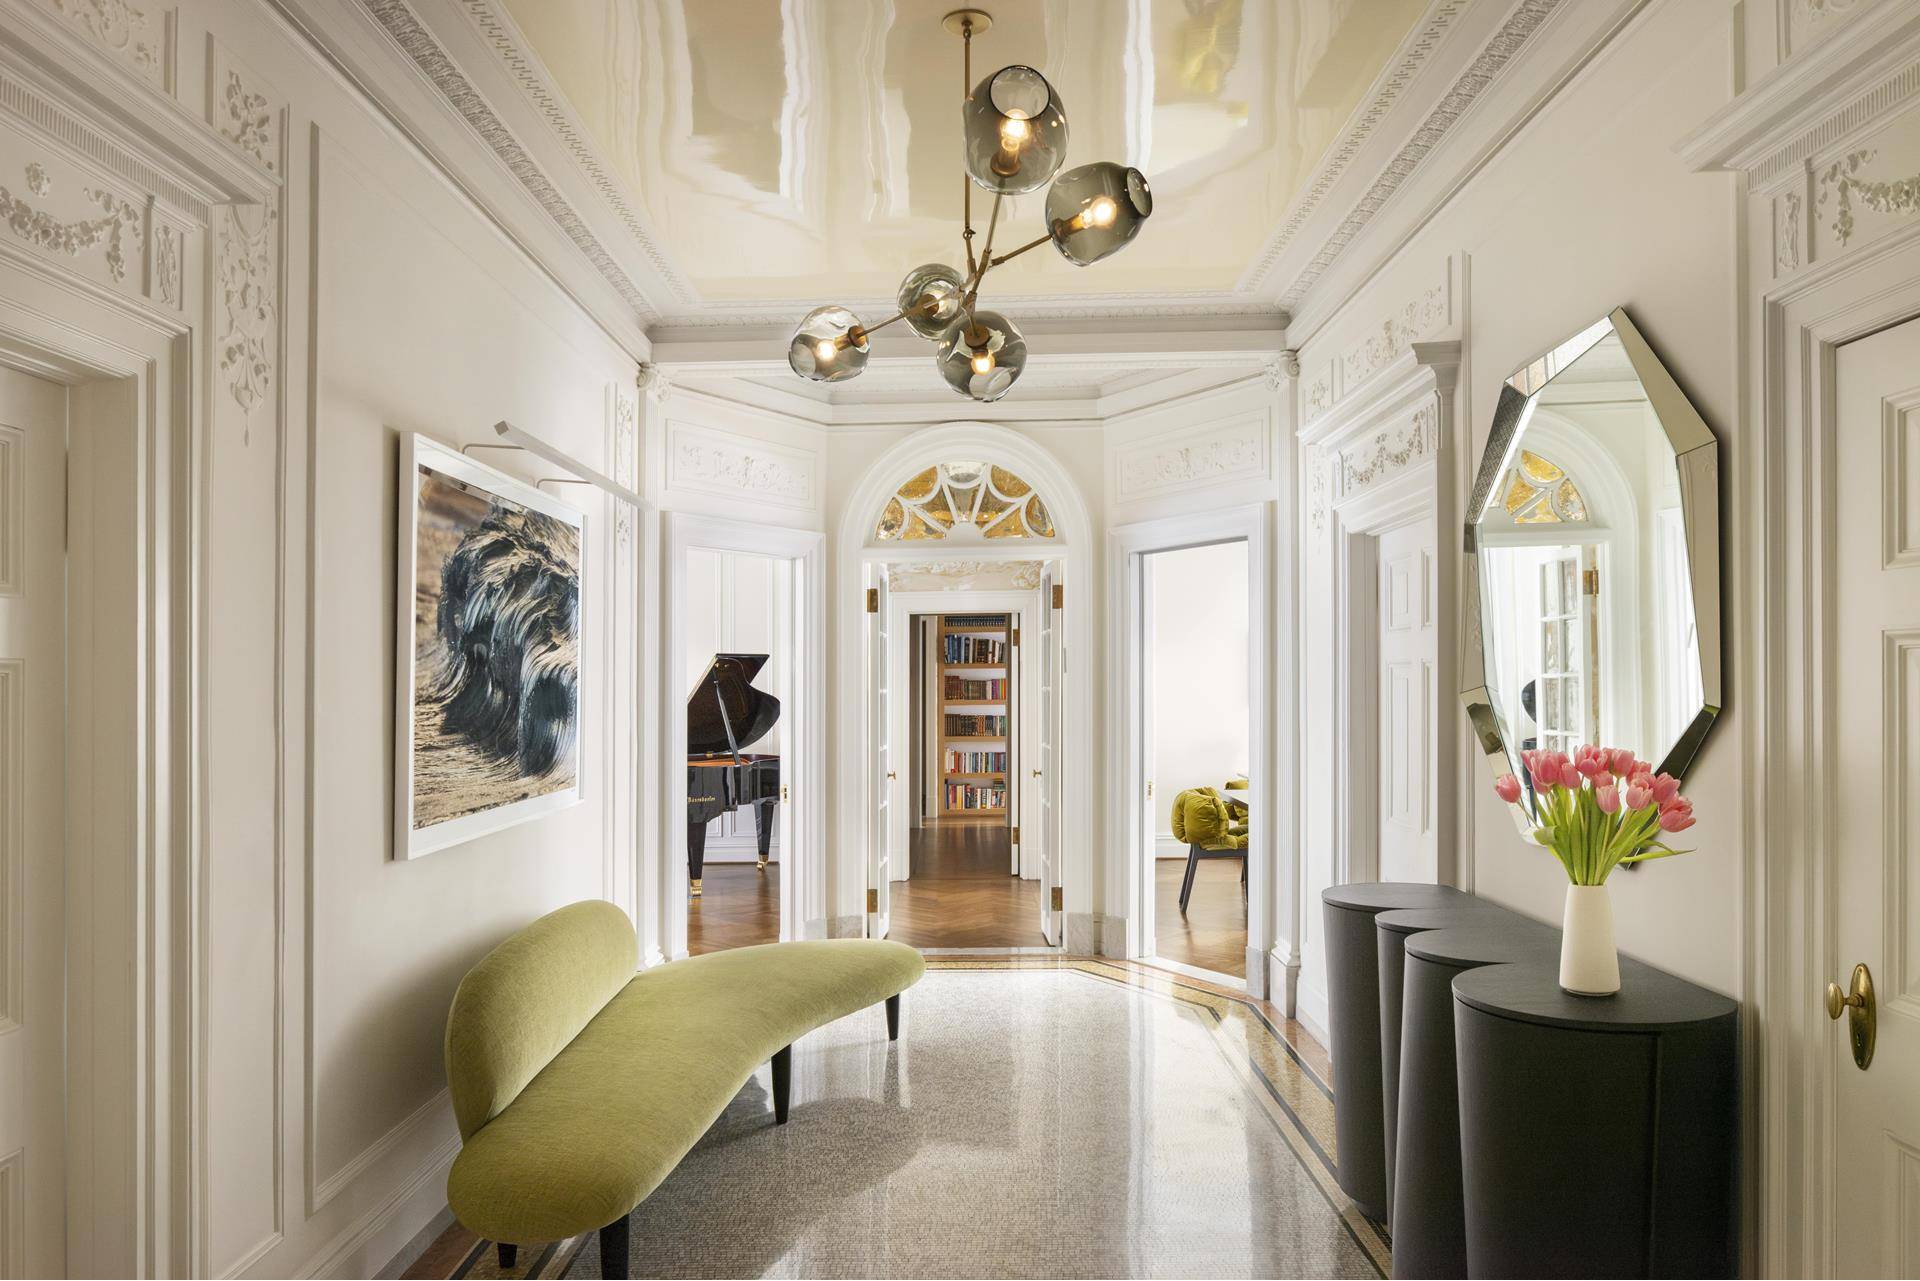 Offered for the first time, 2ABC is the largest private residence ever made available at The Apthorp.